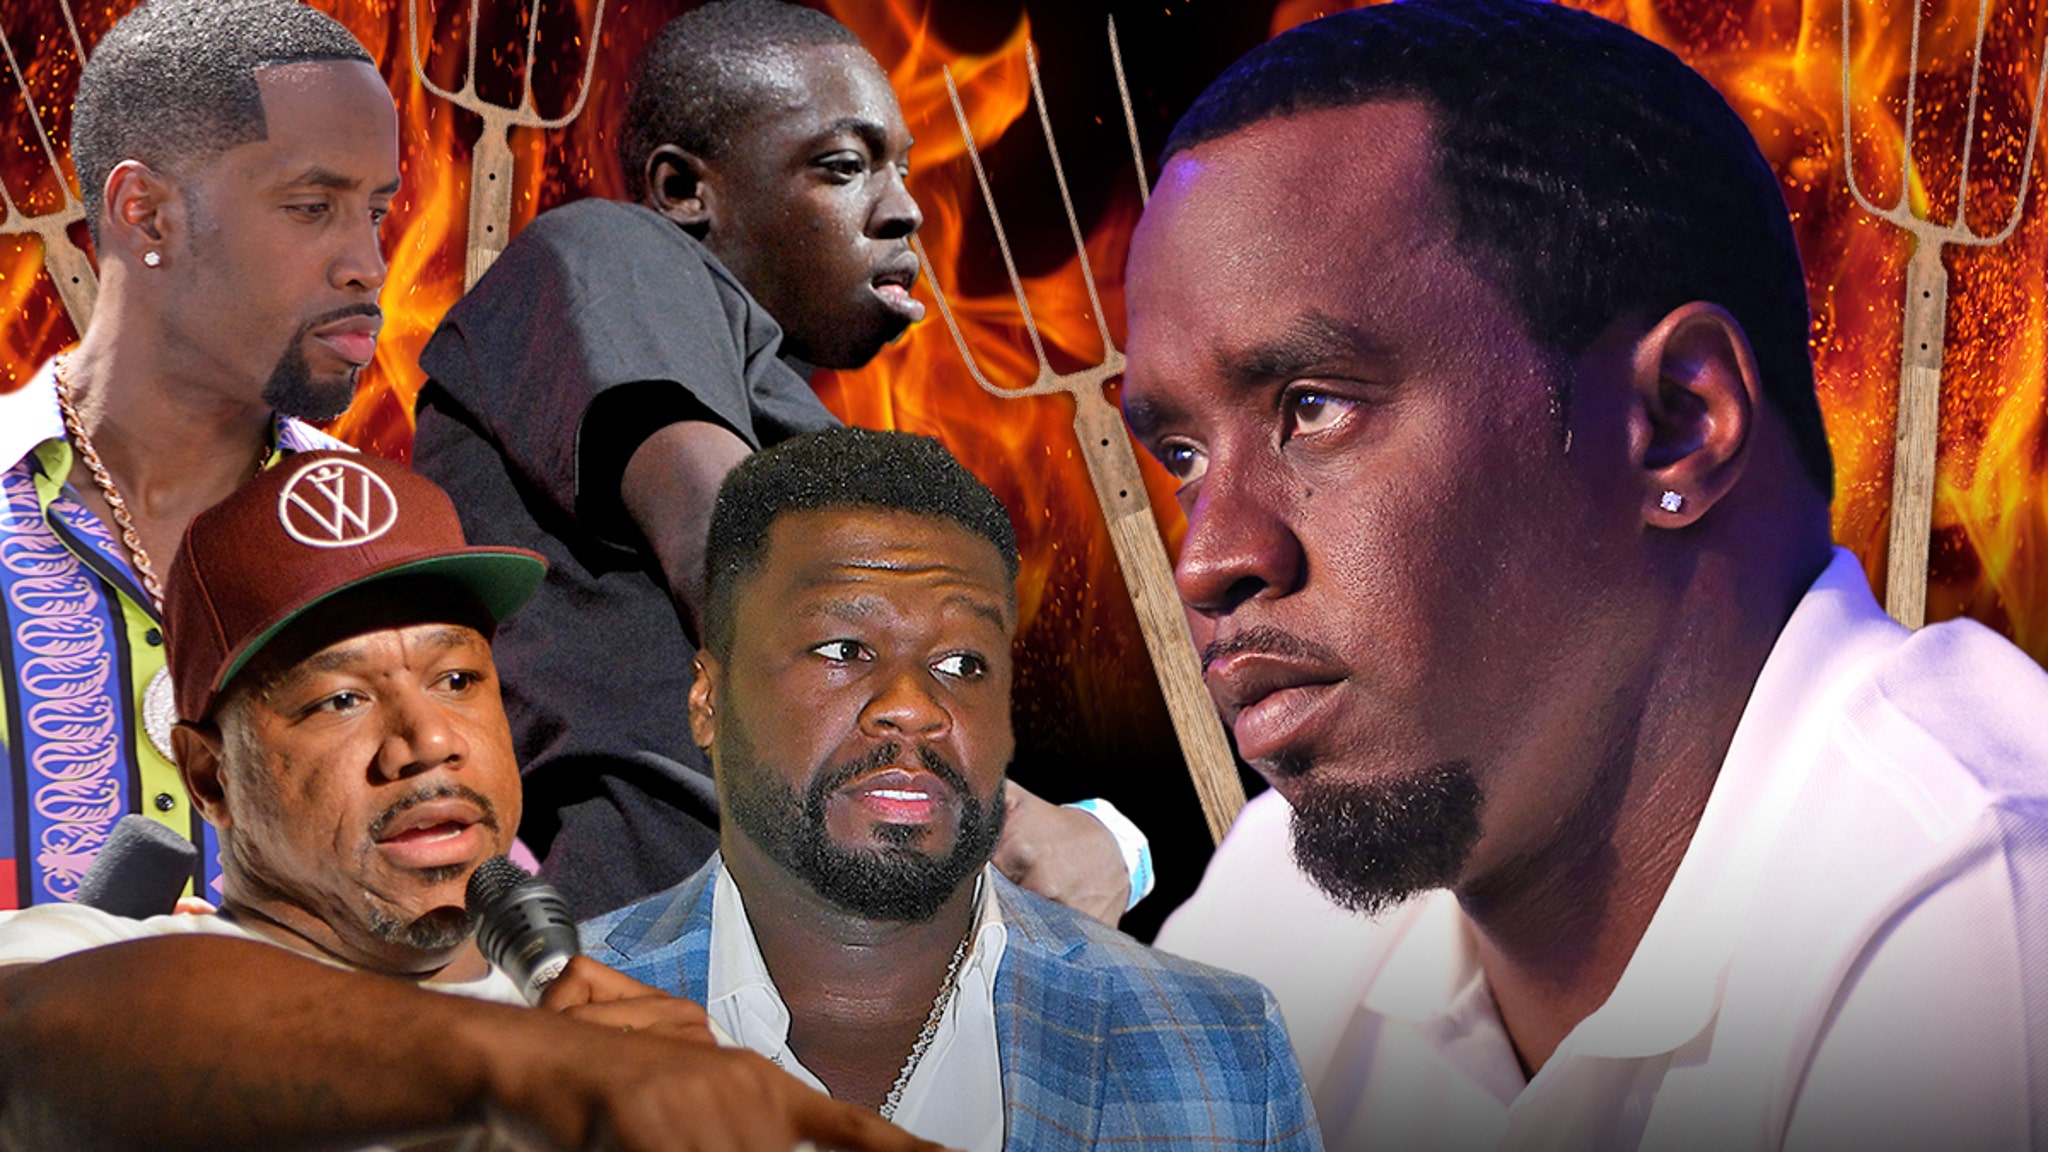 Cassie Assault Video Causes Diddy to Distance Himself from 50 Cent, Bobby Shmurda, and Others